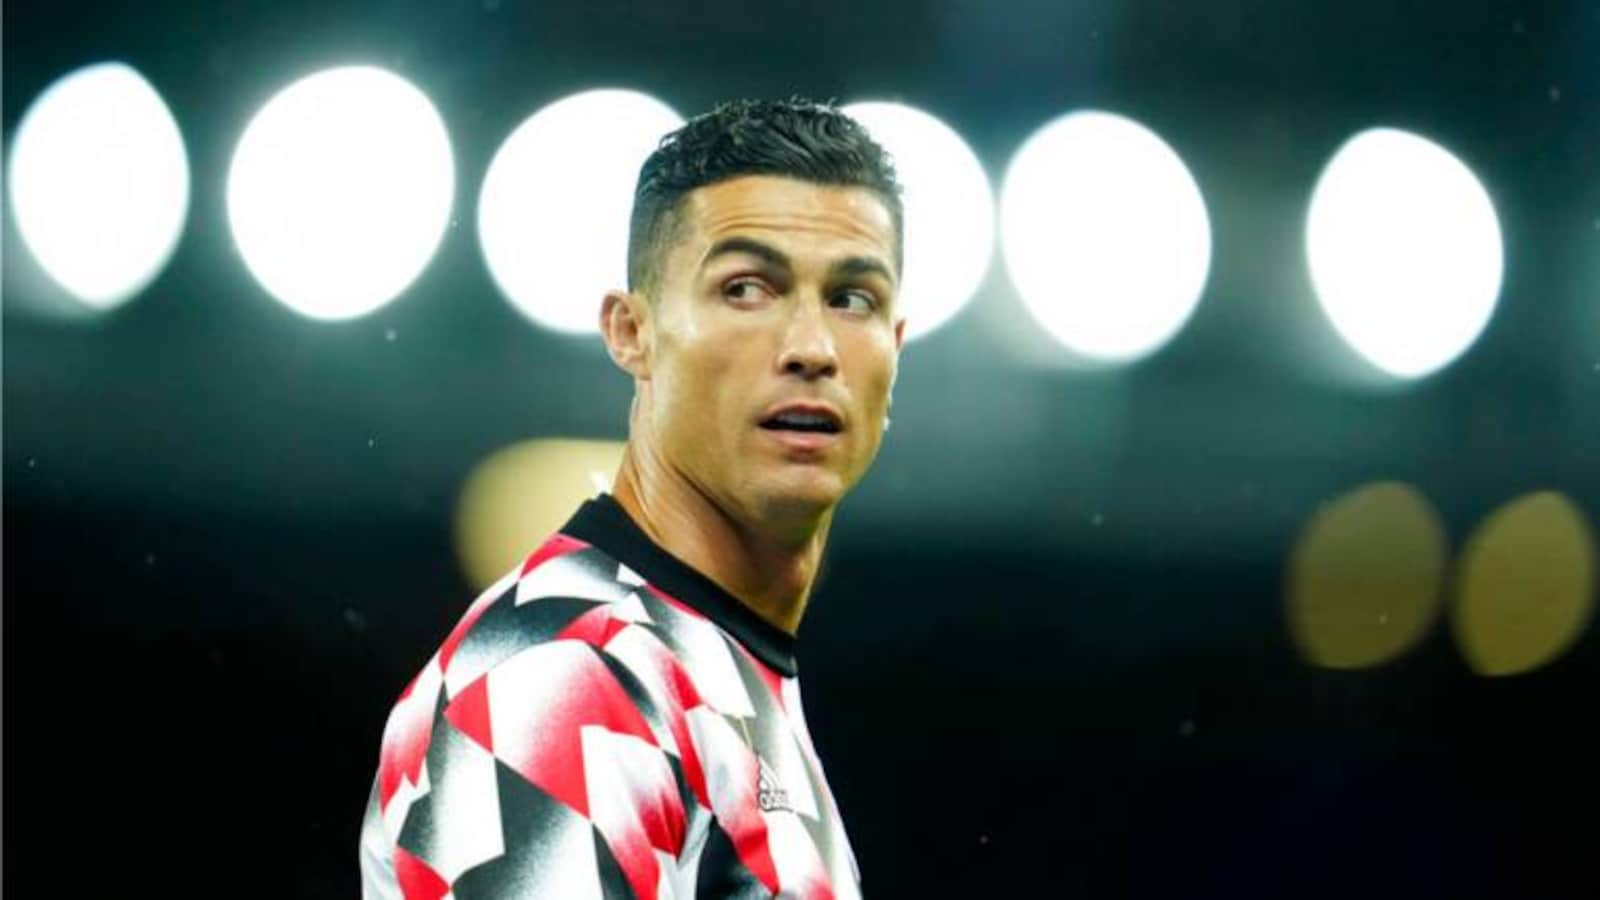 FIFA World Cup 2022 - Cristiano Ronaldo: On-the-wane talisman looking to  sign off in style